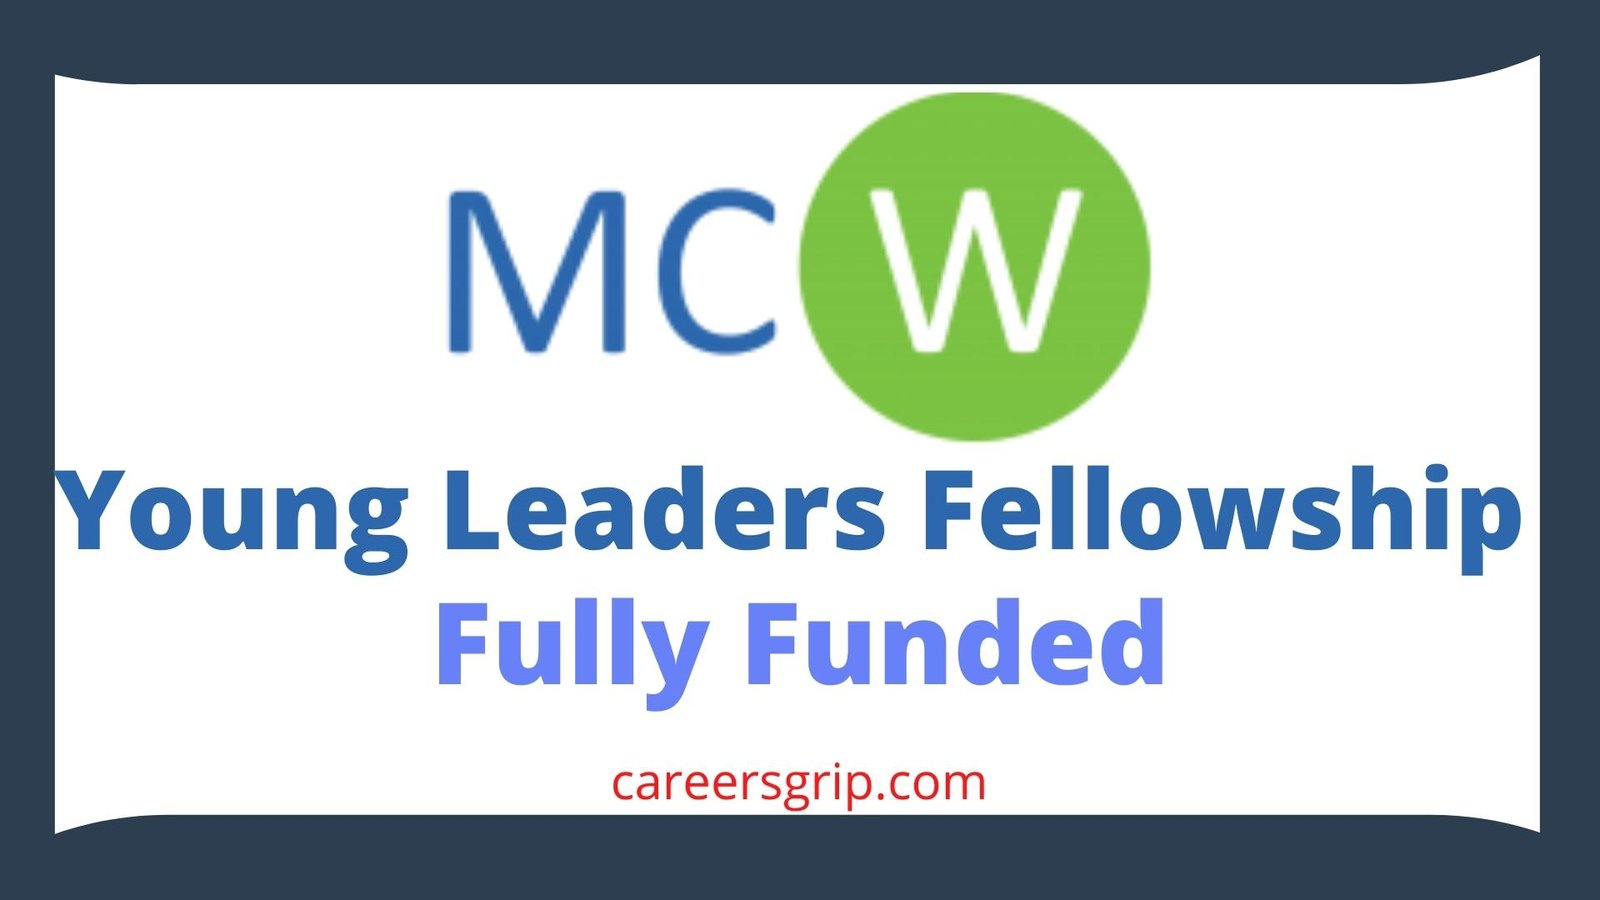 MCW Young Leaders Fellowship